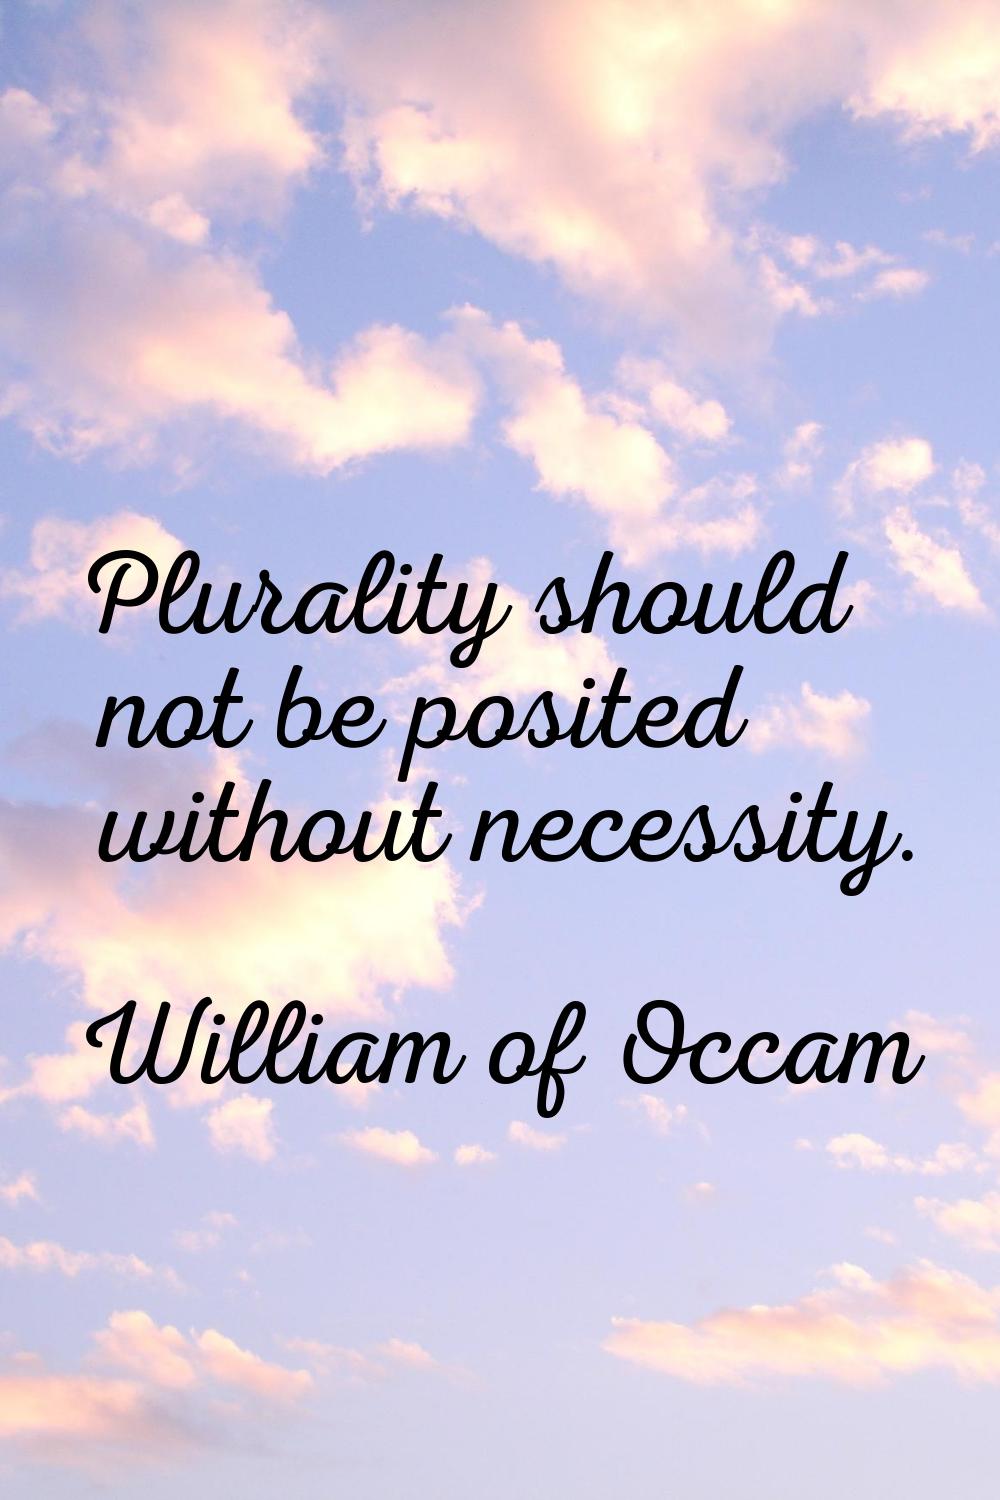 Plurality should not be posited without necessity.